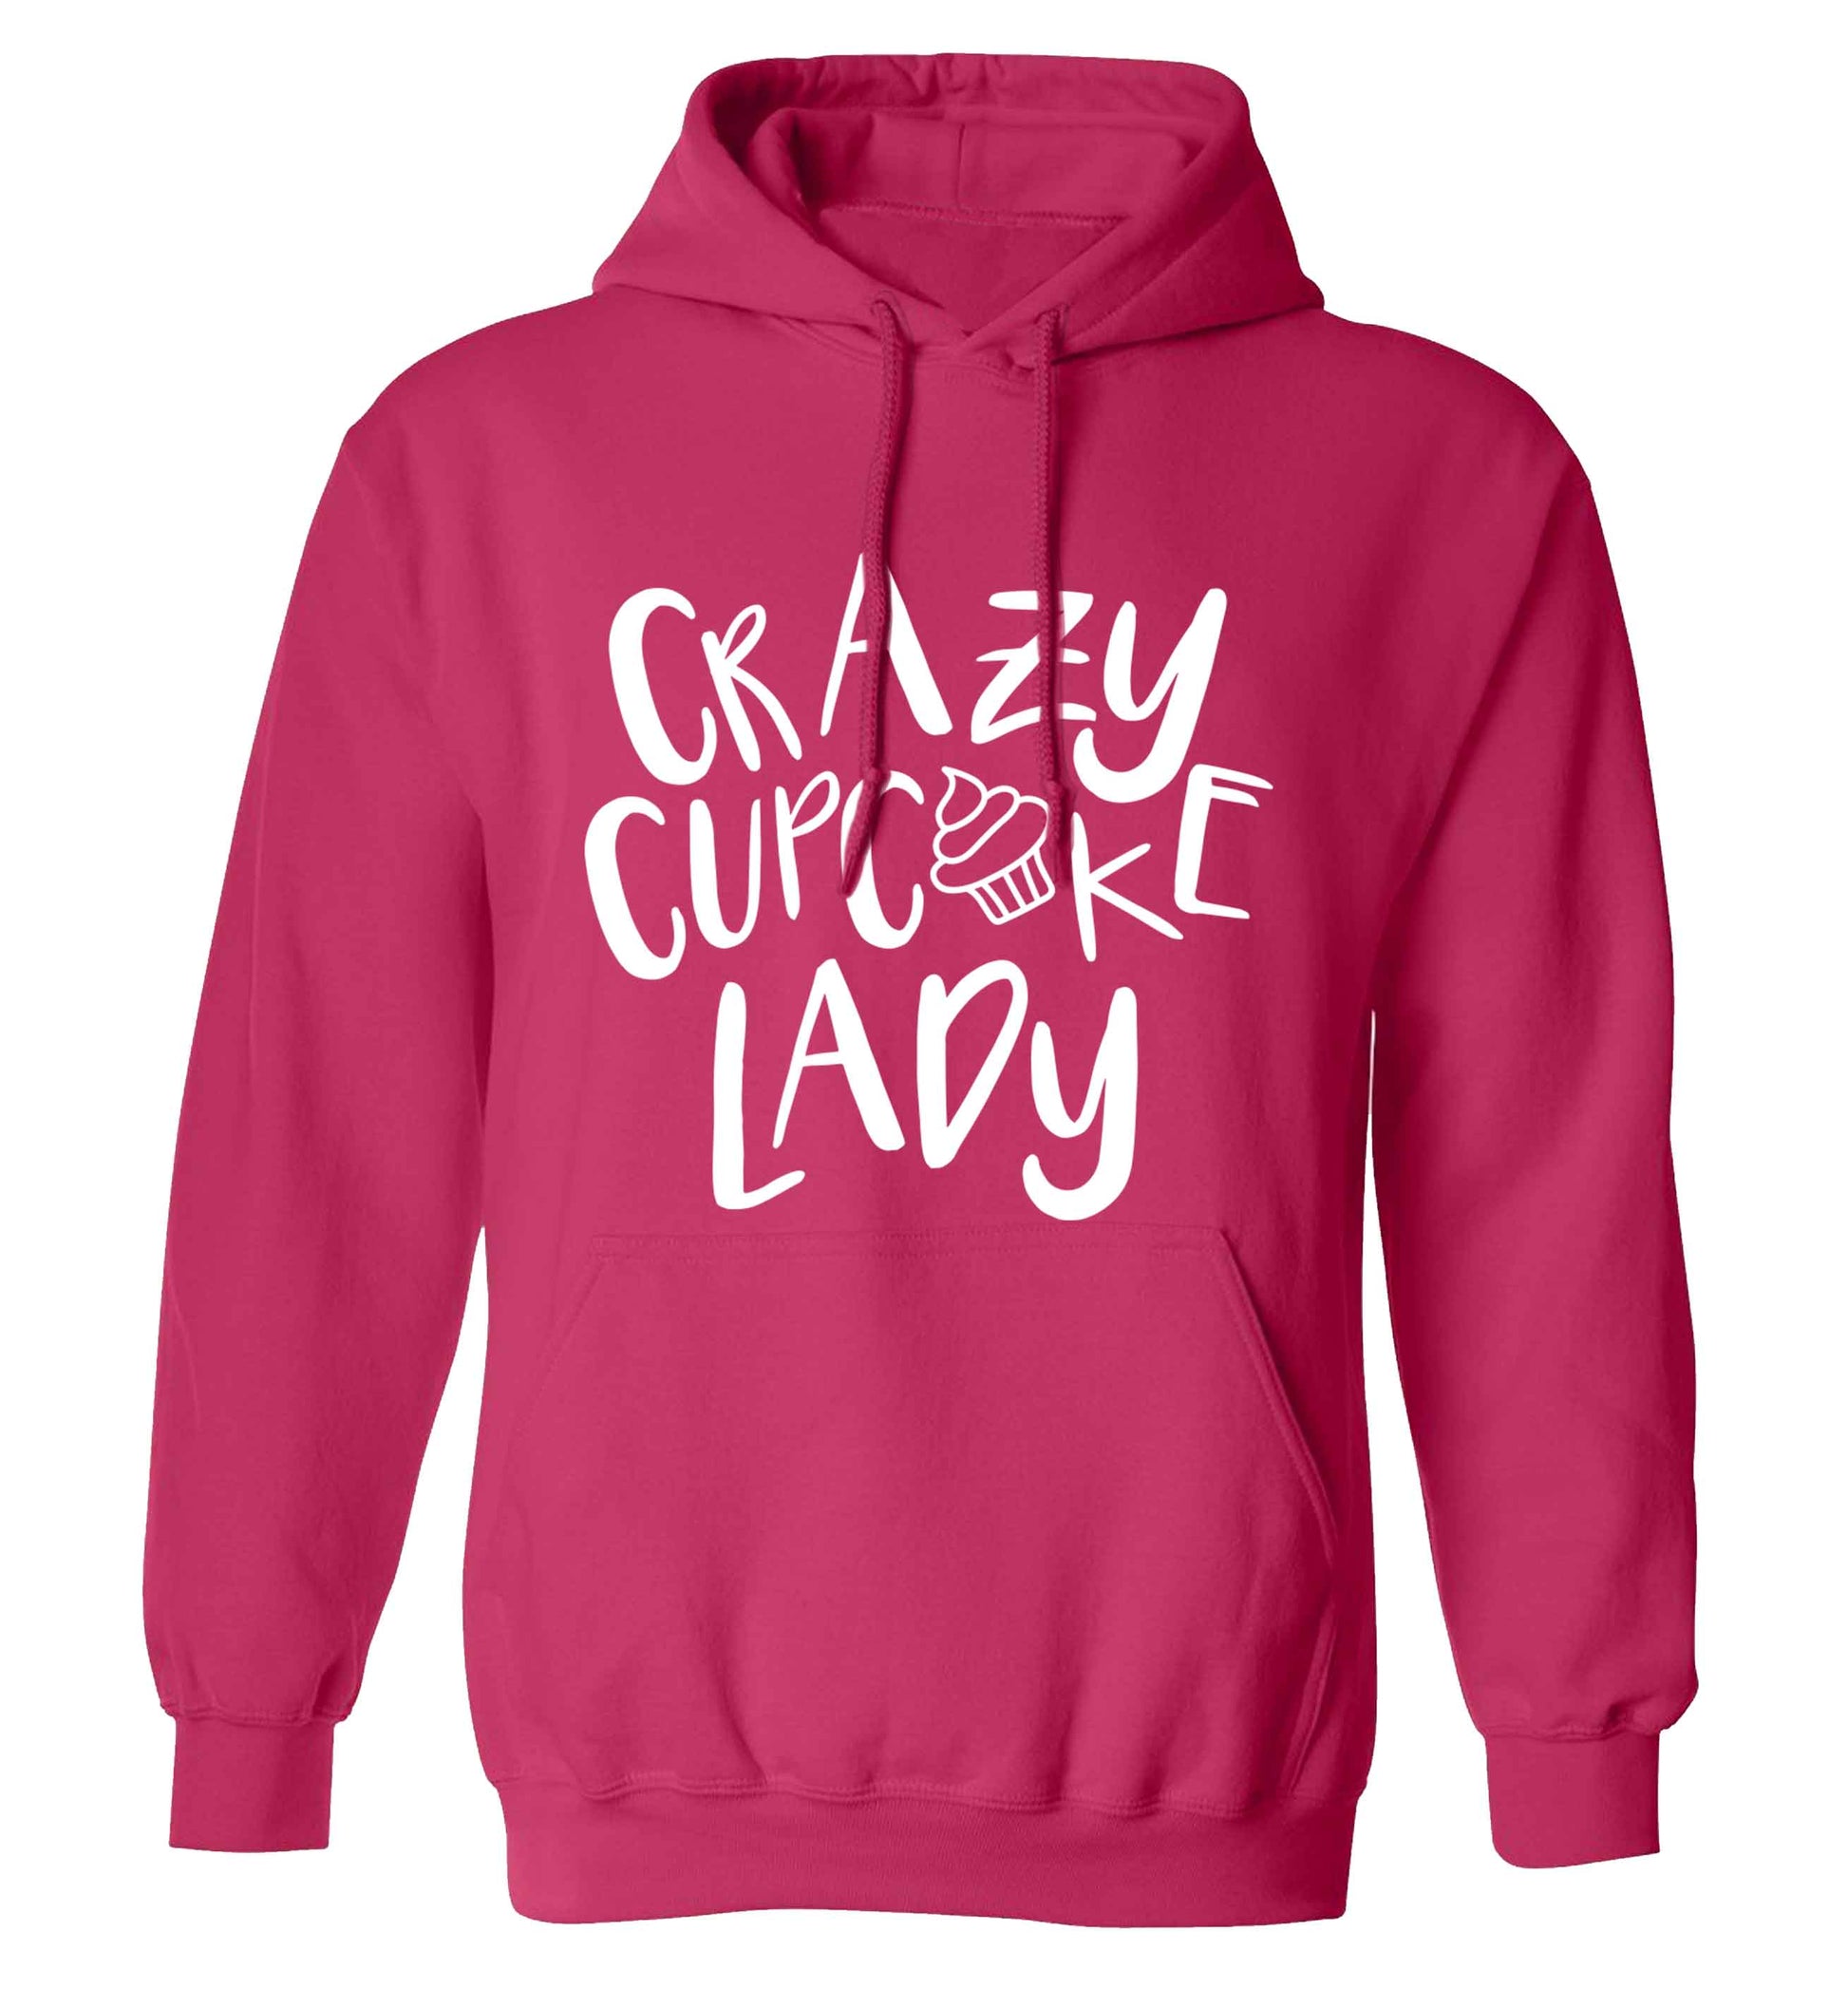 Crazy cupcake lady adults unisex pink hoodie 2XL